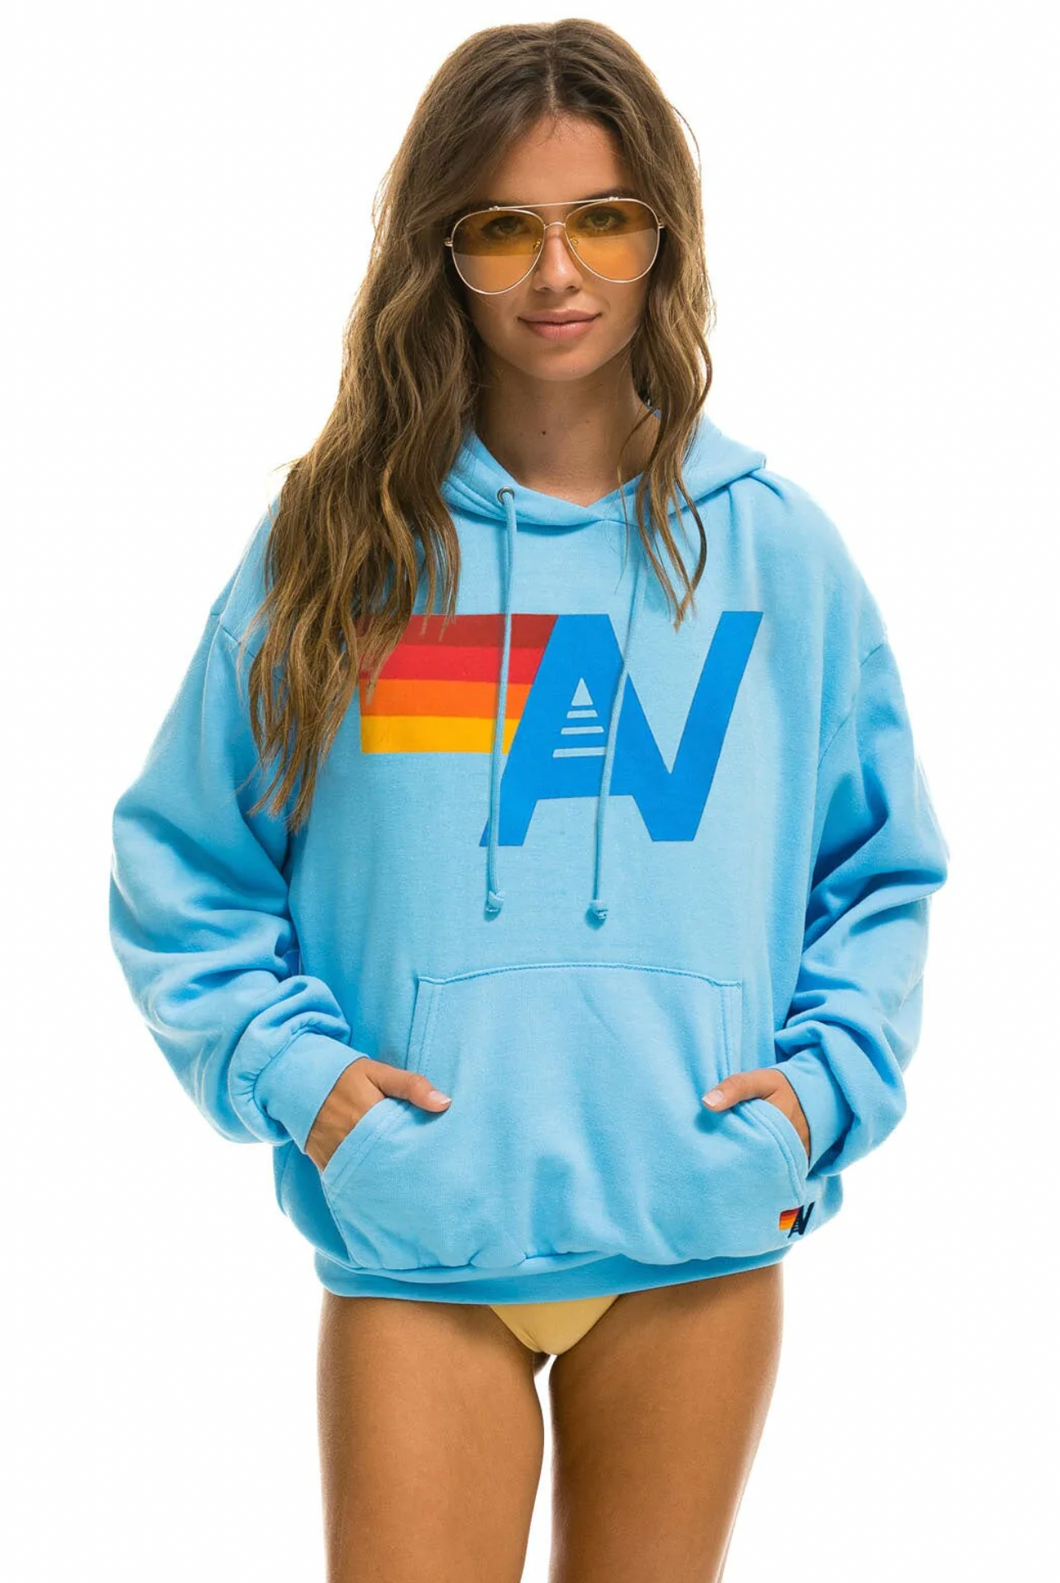 AVIATOR NATION LOGO UNISEX PULLOVER RELAXED HOODIE - SKY